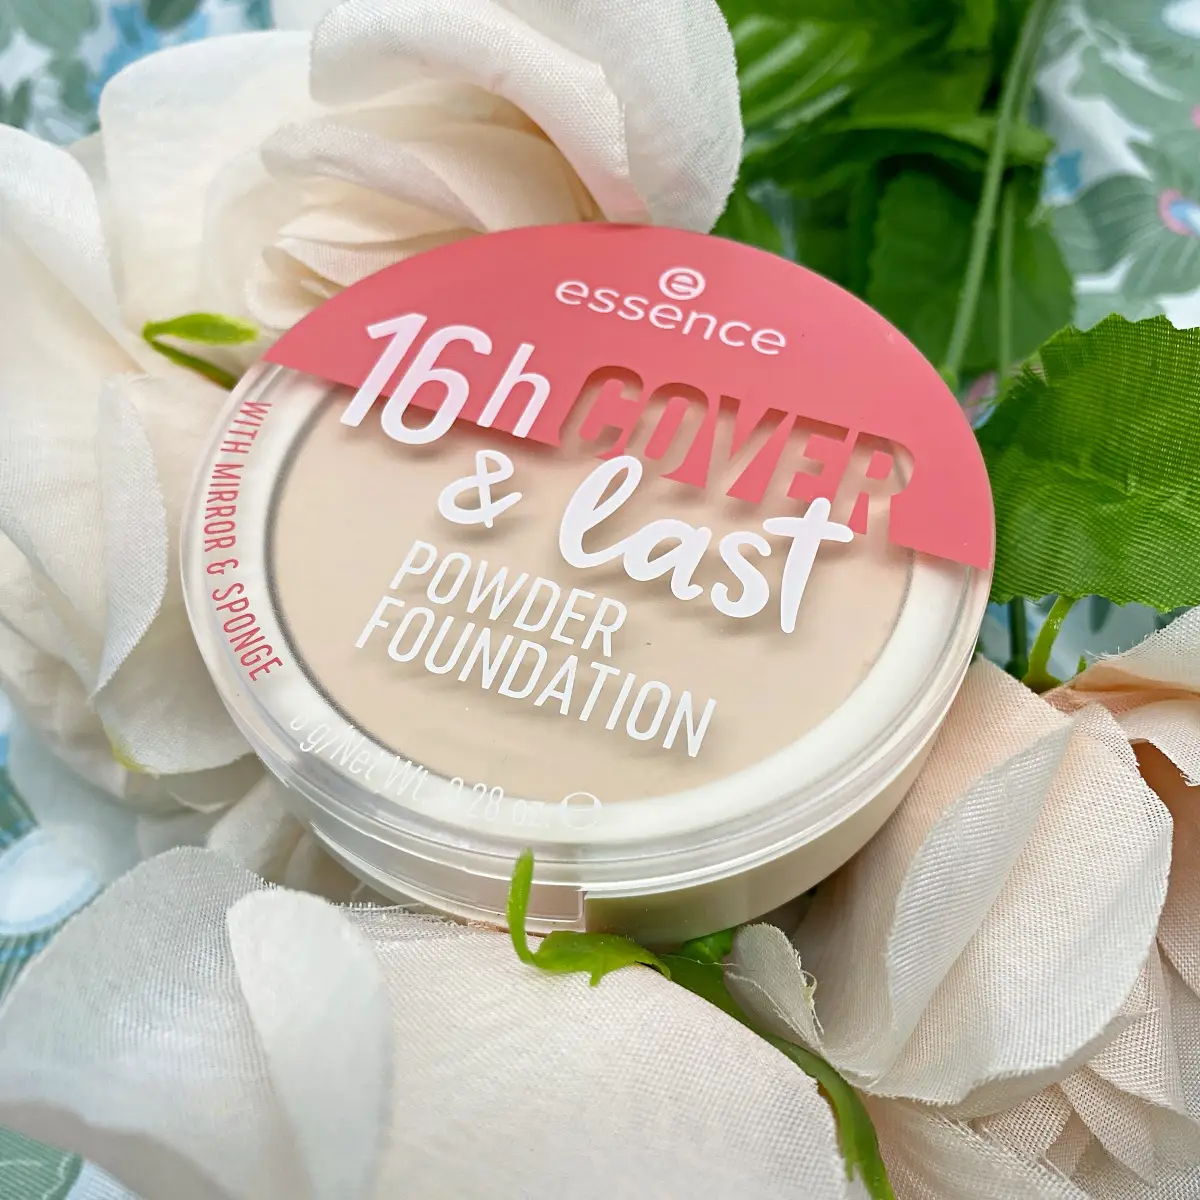 Essence 16 Hour Cover and Last Powder Foundation Review